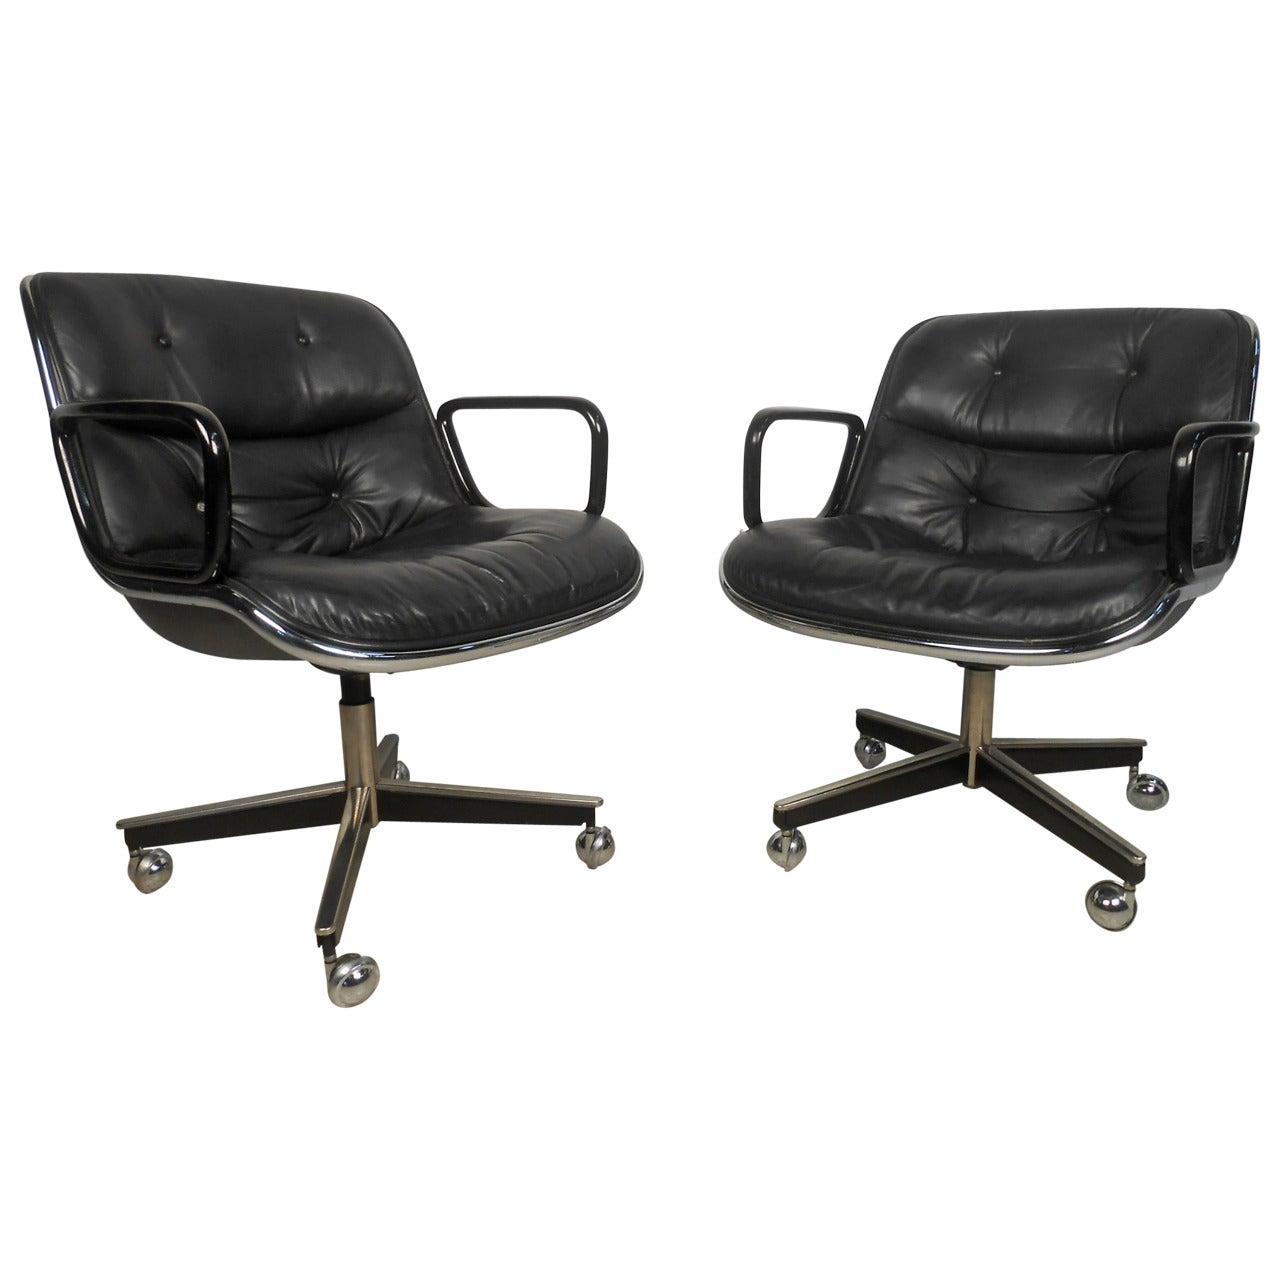 Pair of Mid-Century Modern Knoll Executive Chairs